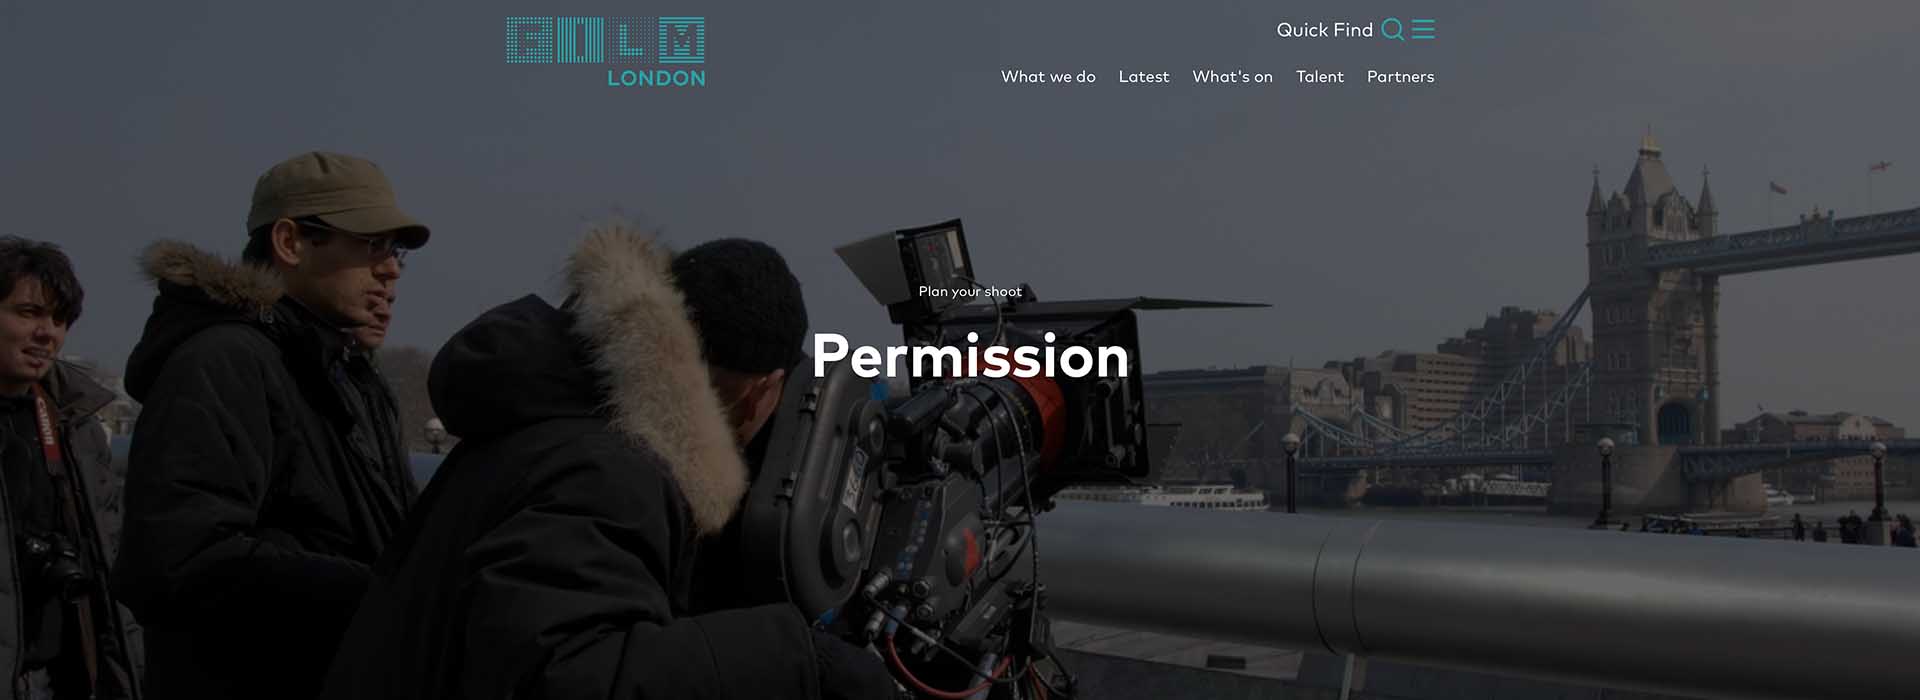 Film London, a resource for permissions and permits for video and film production in London city